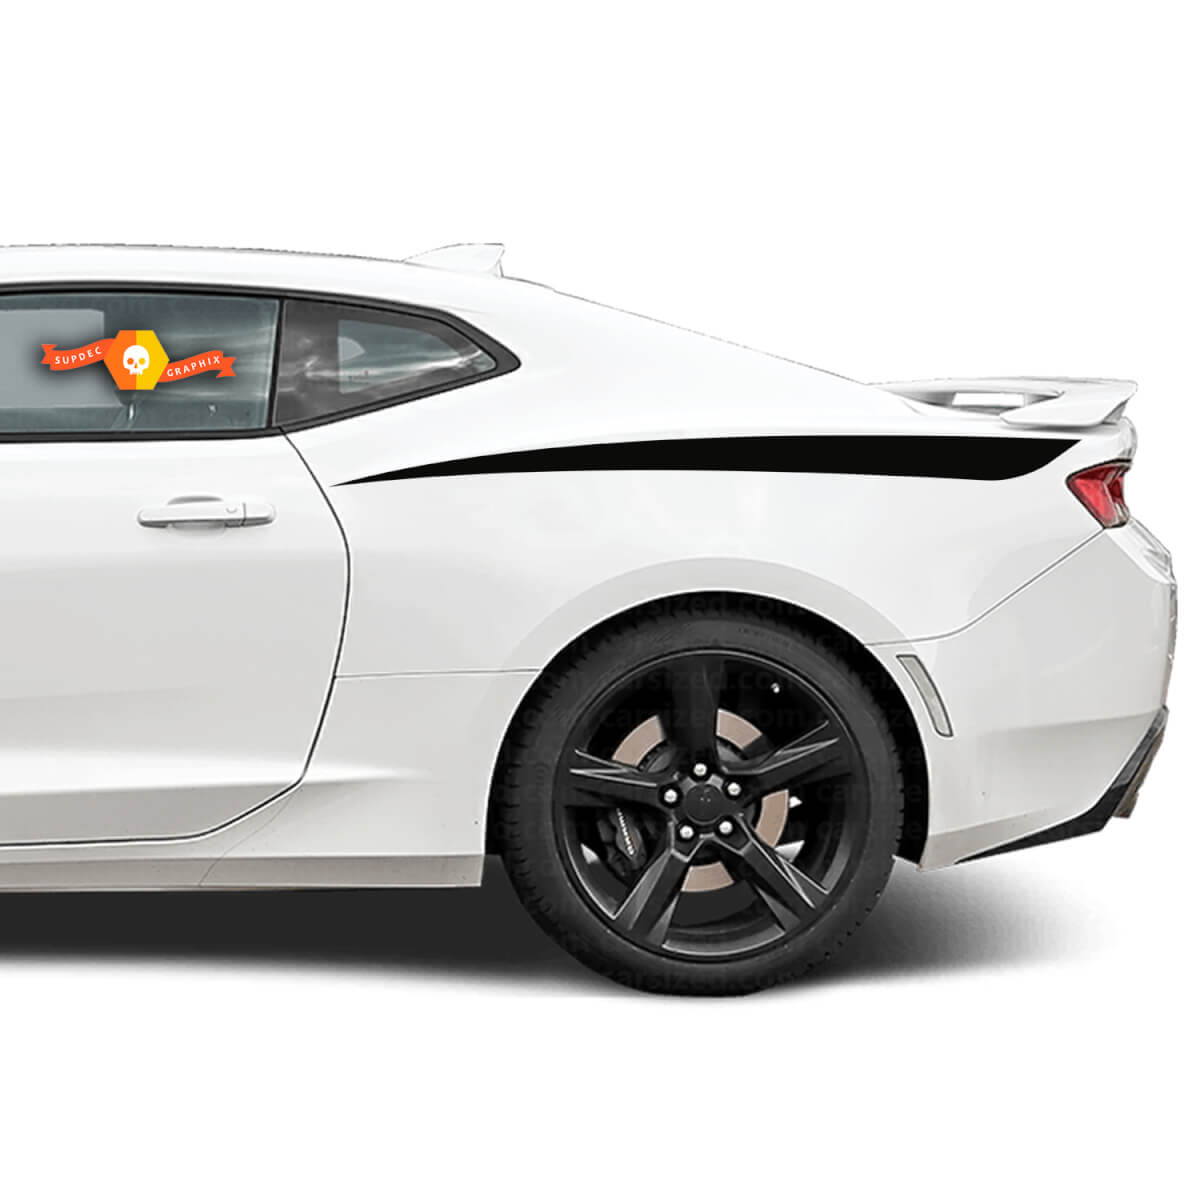 Chevrolet Camaro 2010- 2018 Rear Quarter Side Accent Decal Stripes